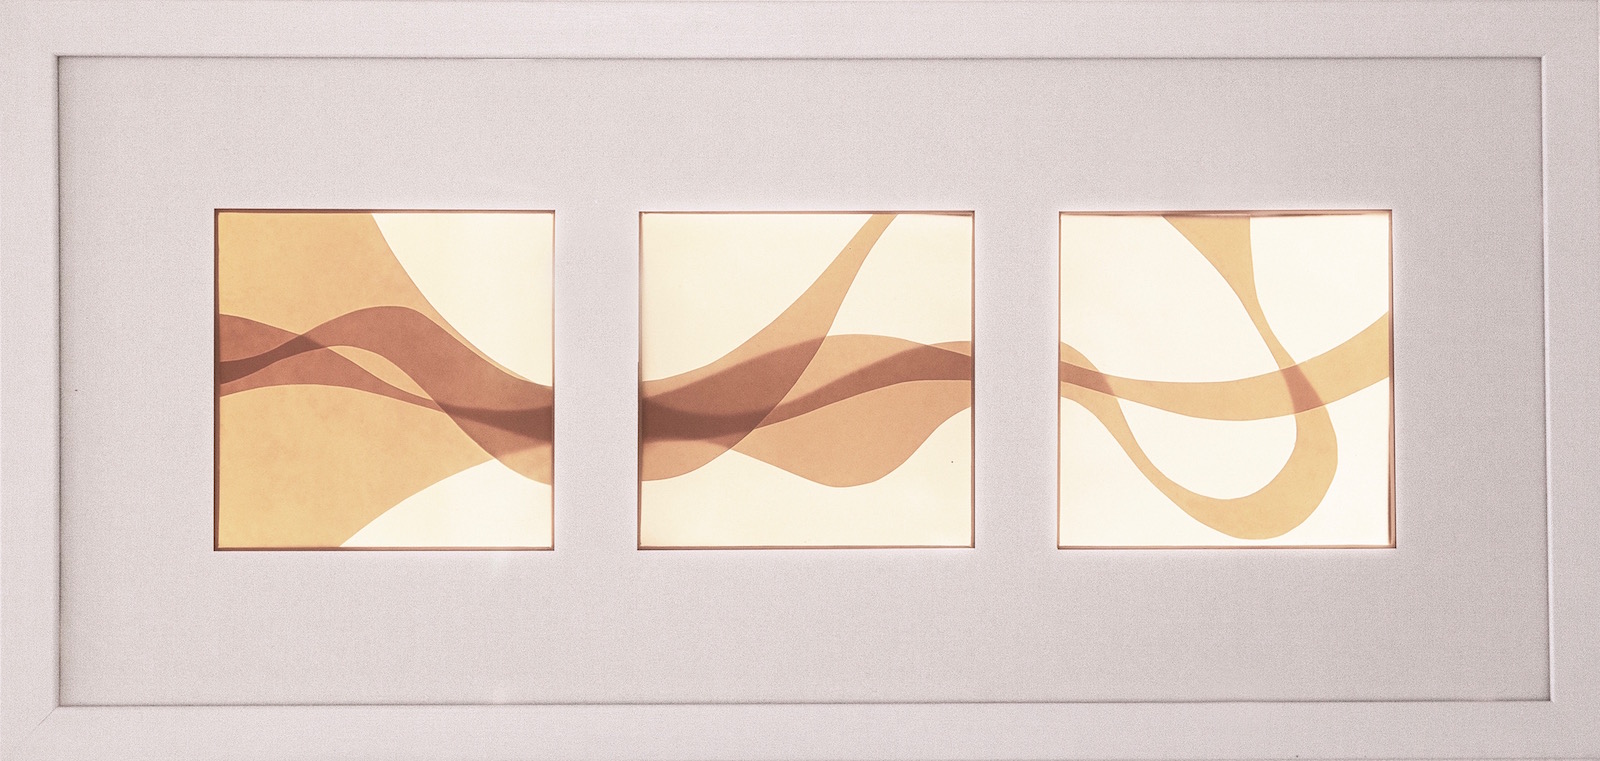 Backlit image consisting of three windows with abstract wave shapes spanning across